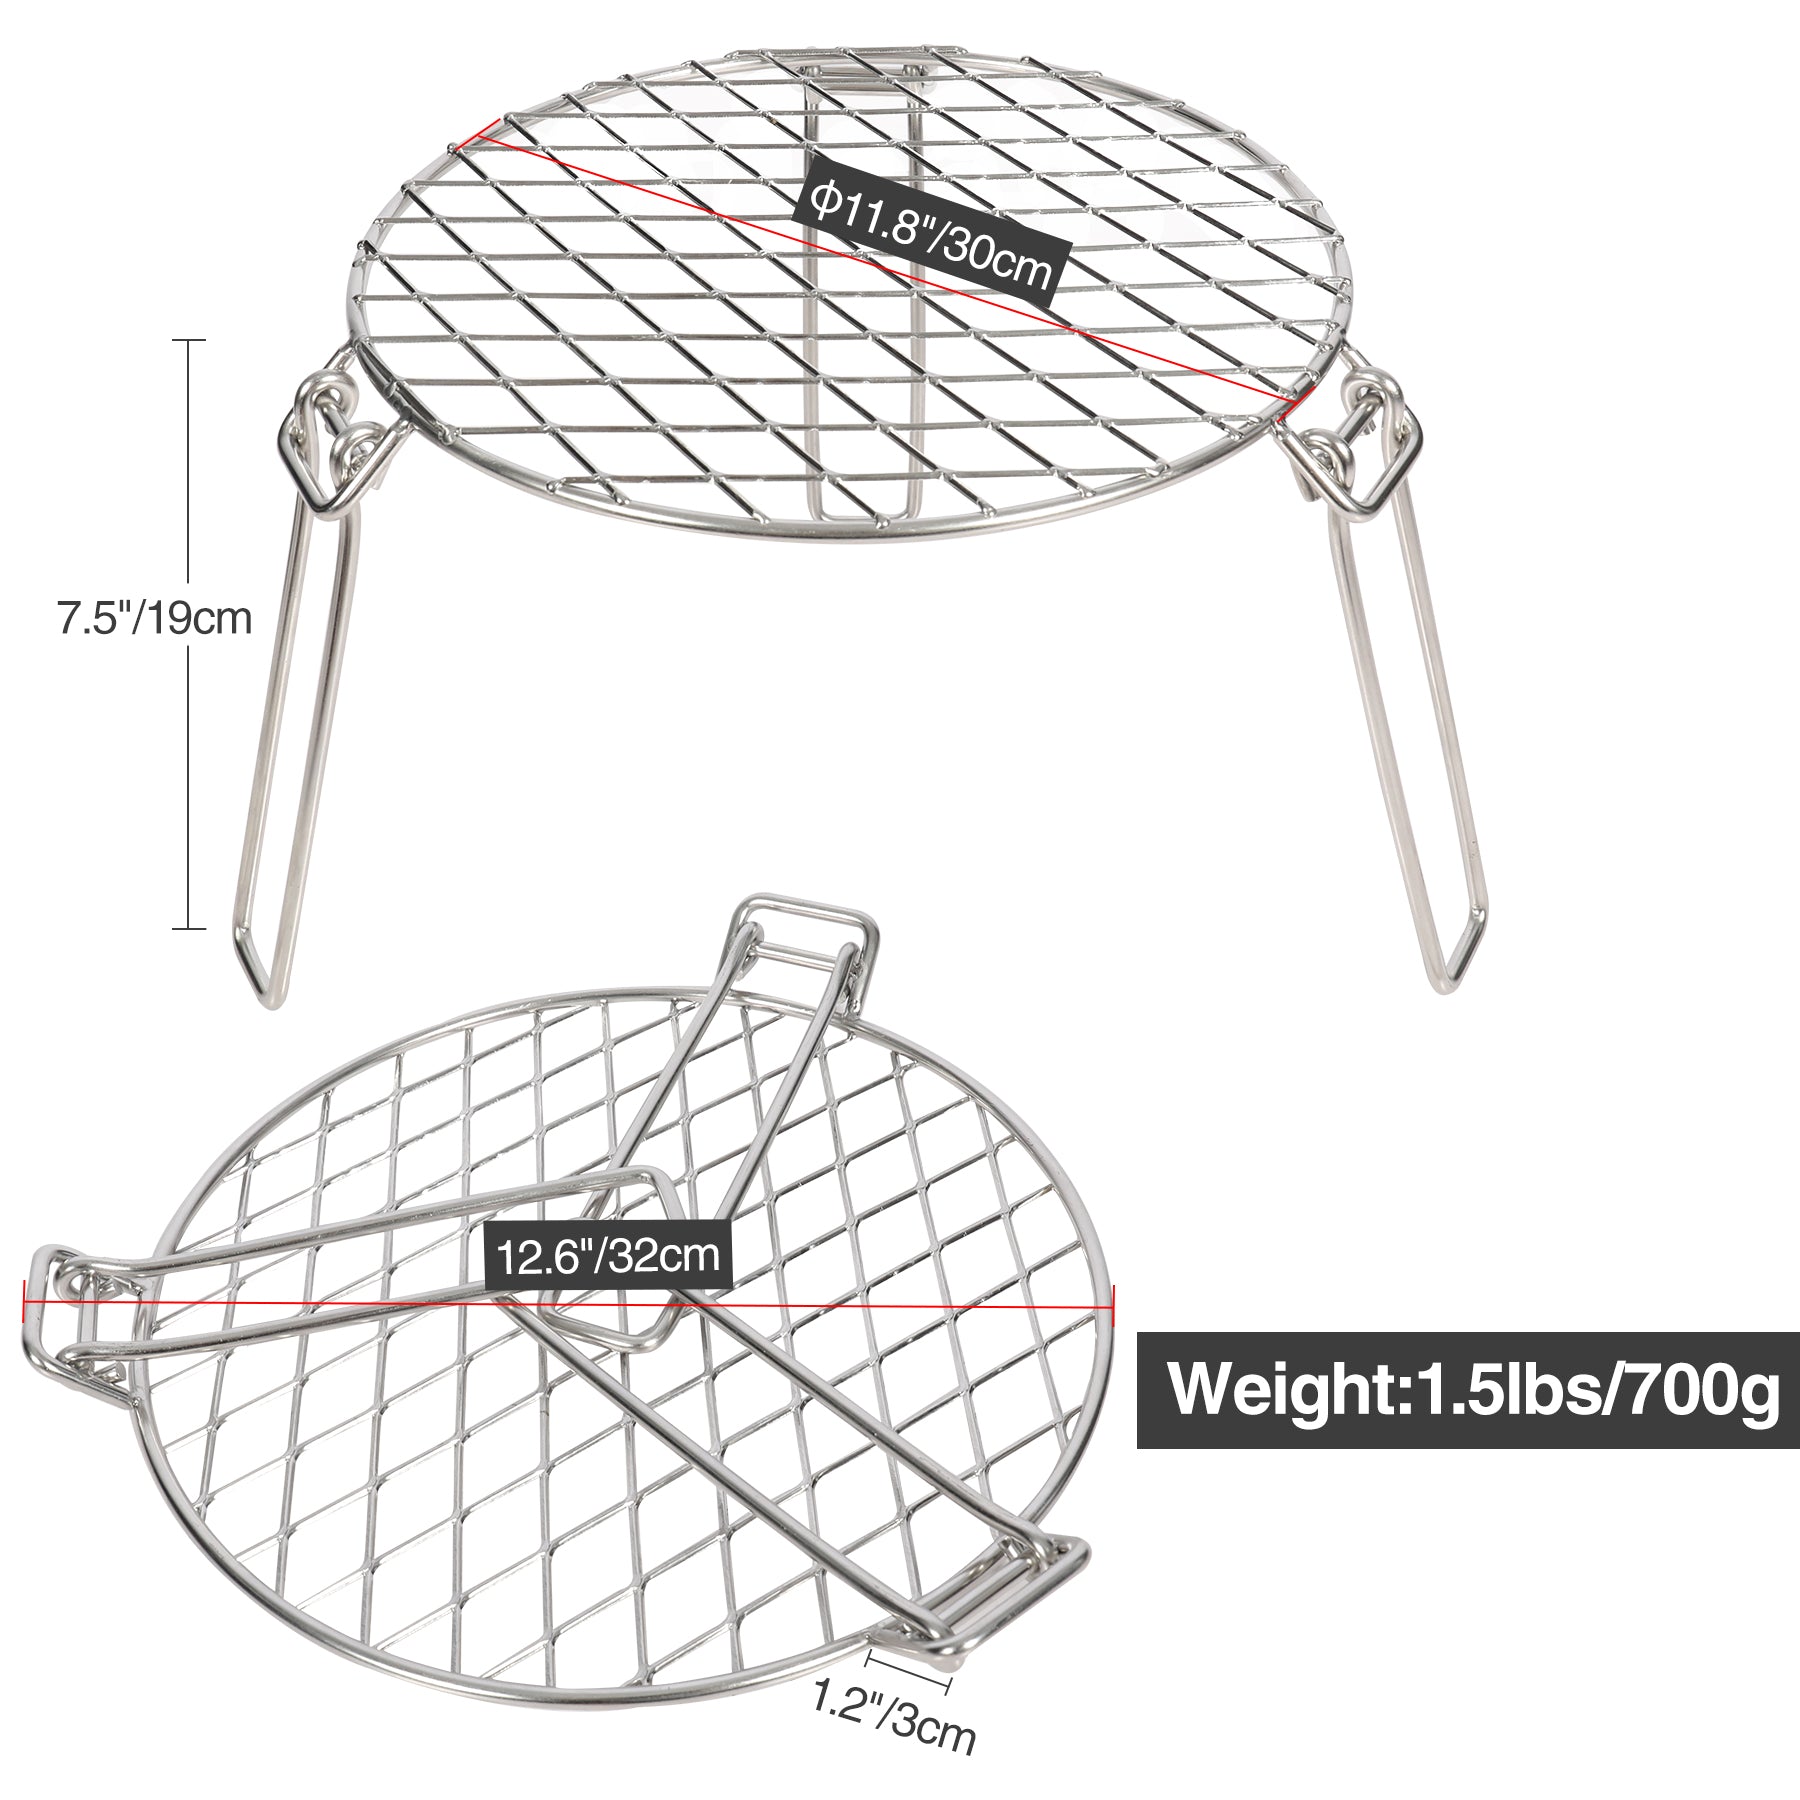 REDCAMP Folding Round Campfire Grill Grate